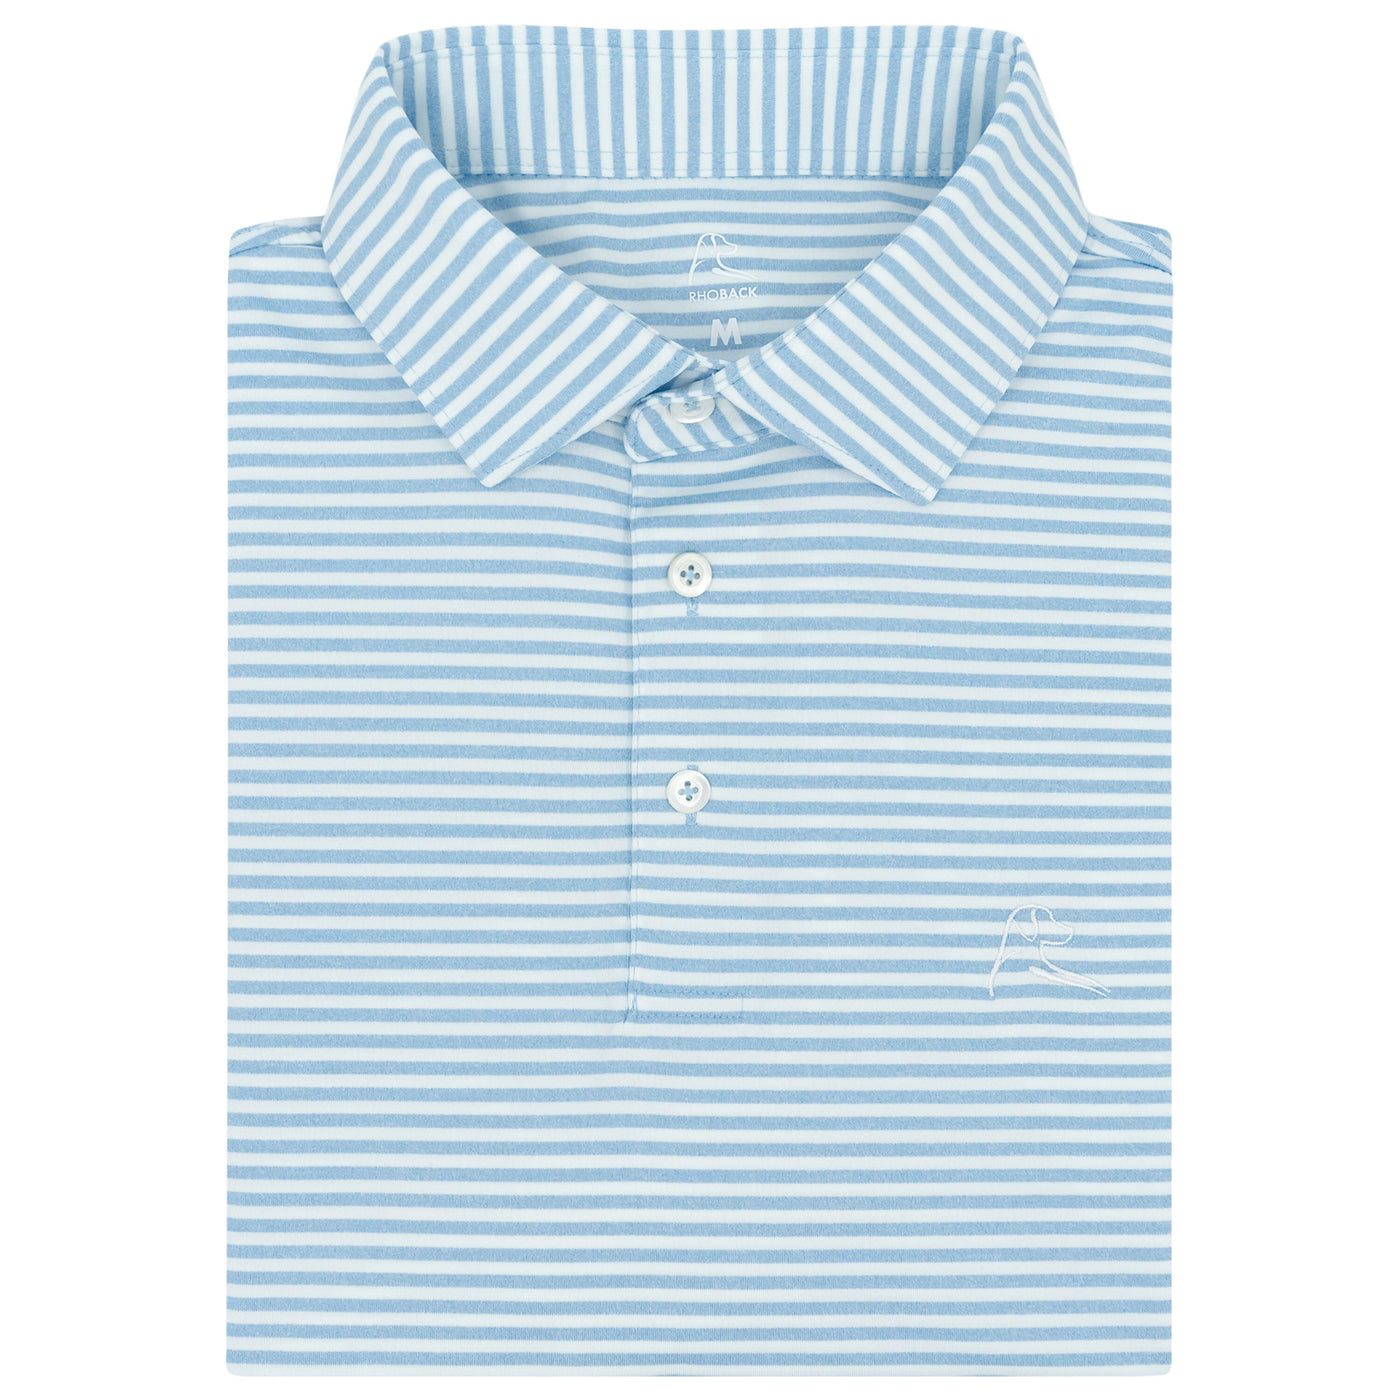 The Barts Heather Stripe | Performance Polo | The Barts Heather Stripe - Seafoam/Stone Blue